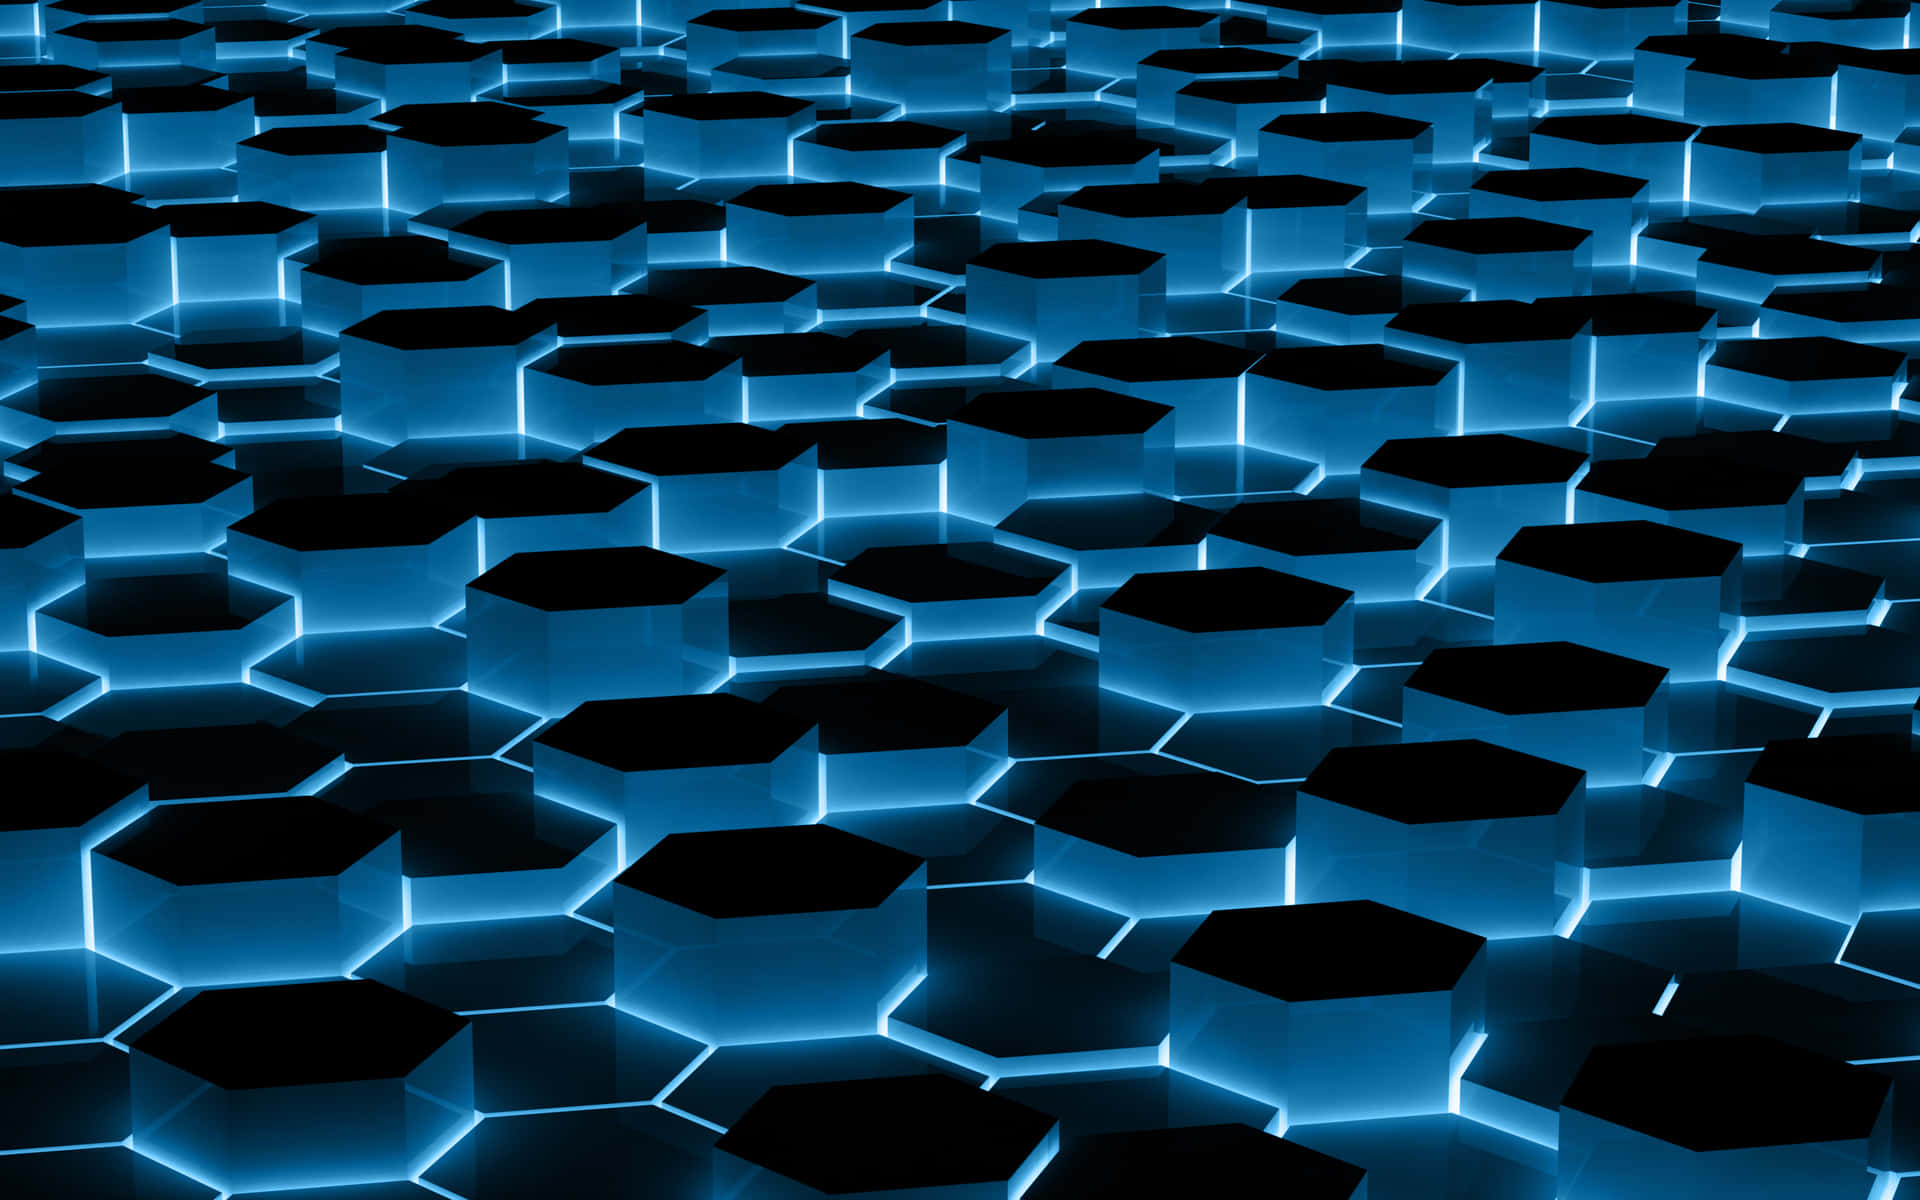 A vibrant blue and orange-hued hexagonal pattern on a dark background.